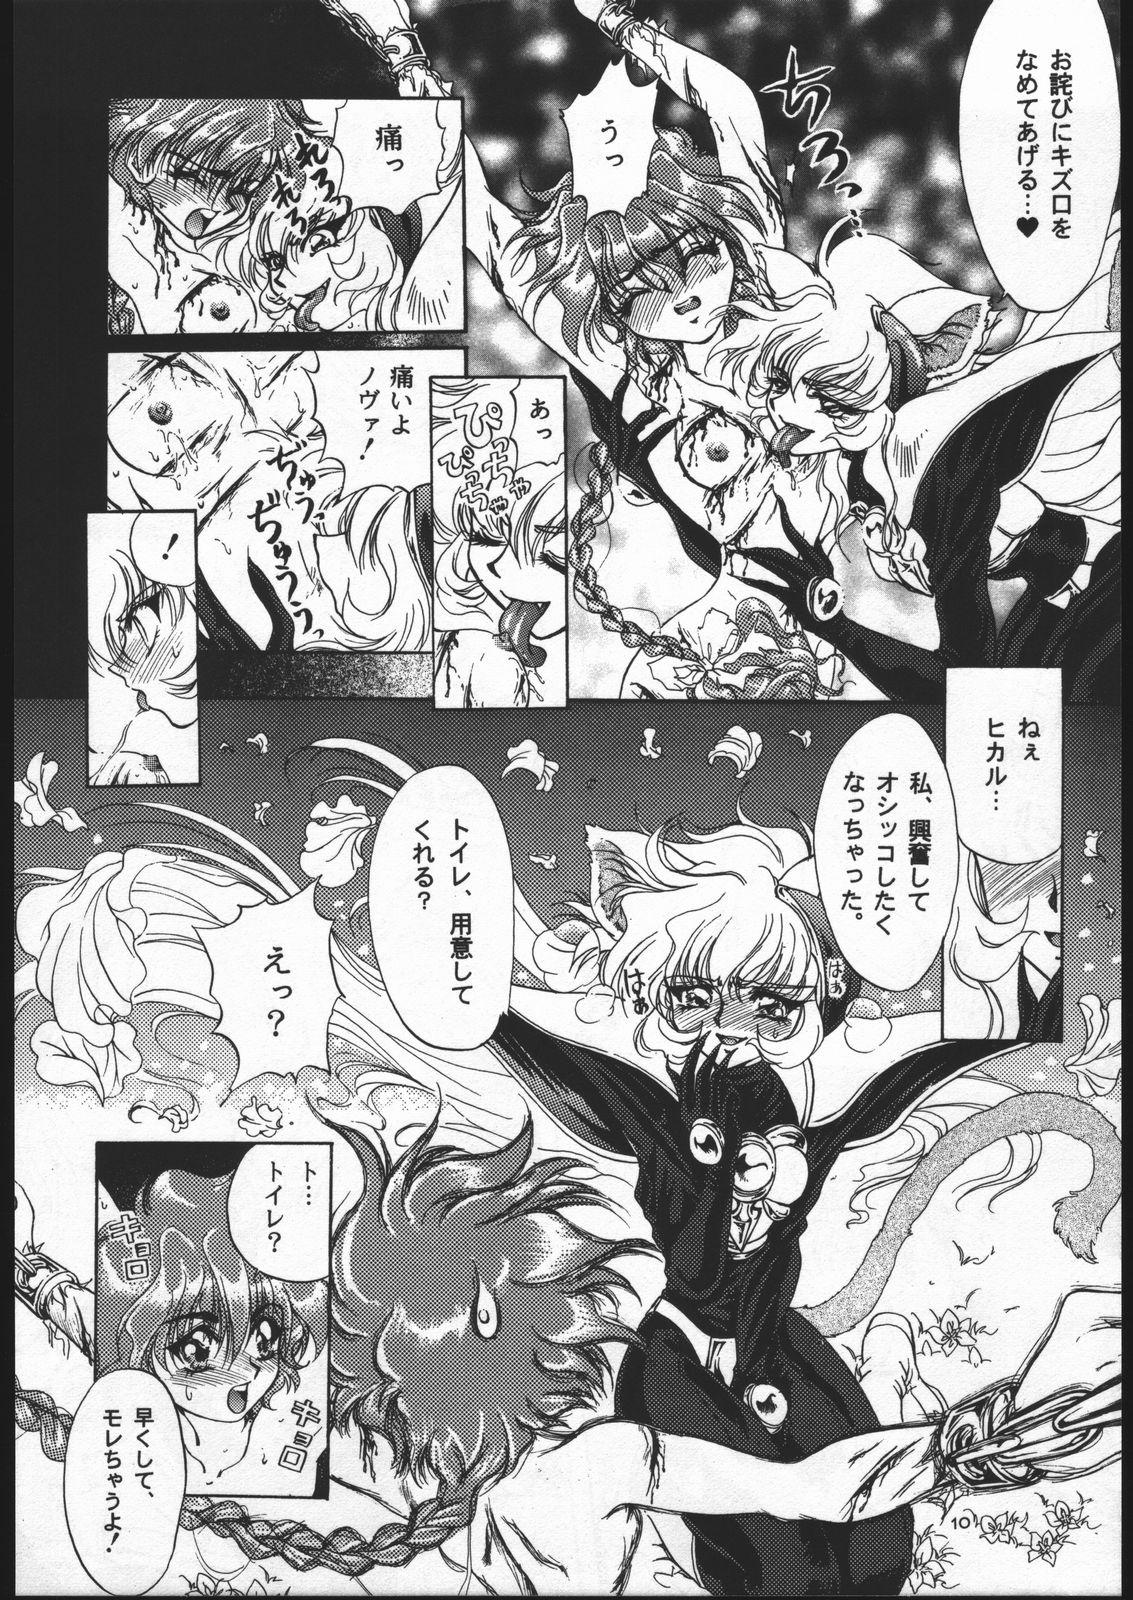 She Rose Pink - Magic knight rayearth Blowing - Page 9